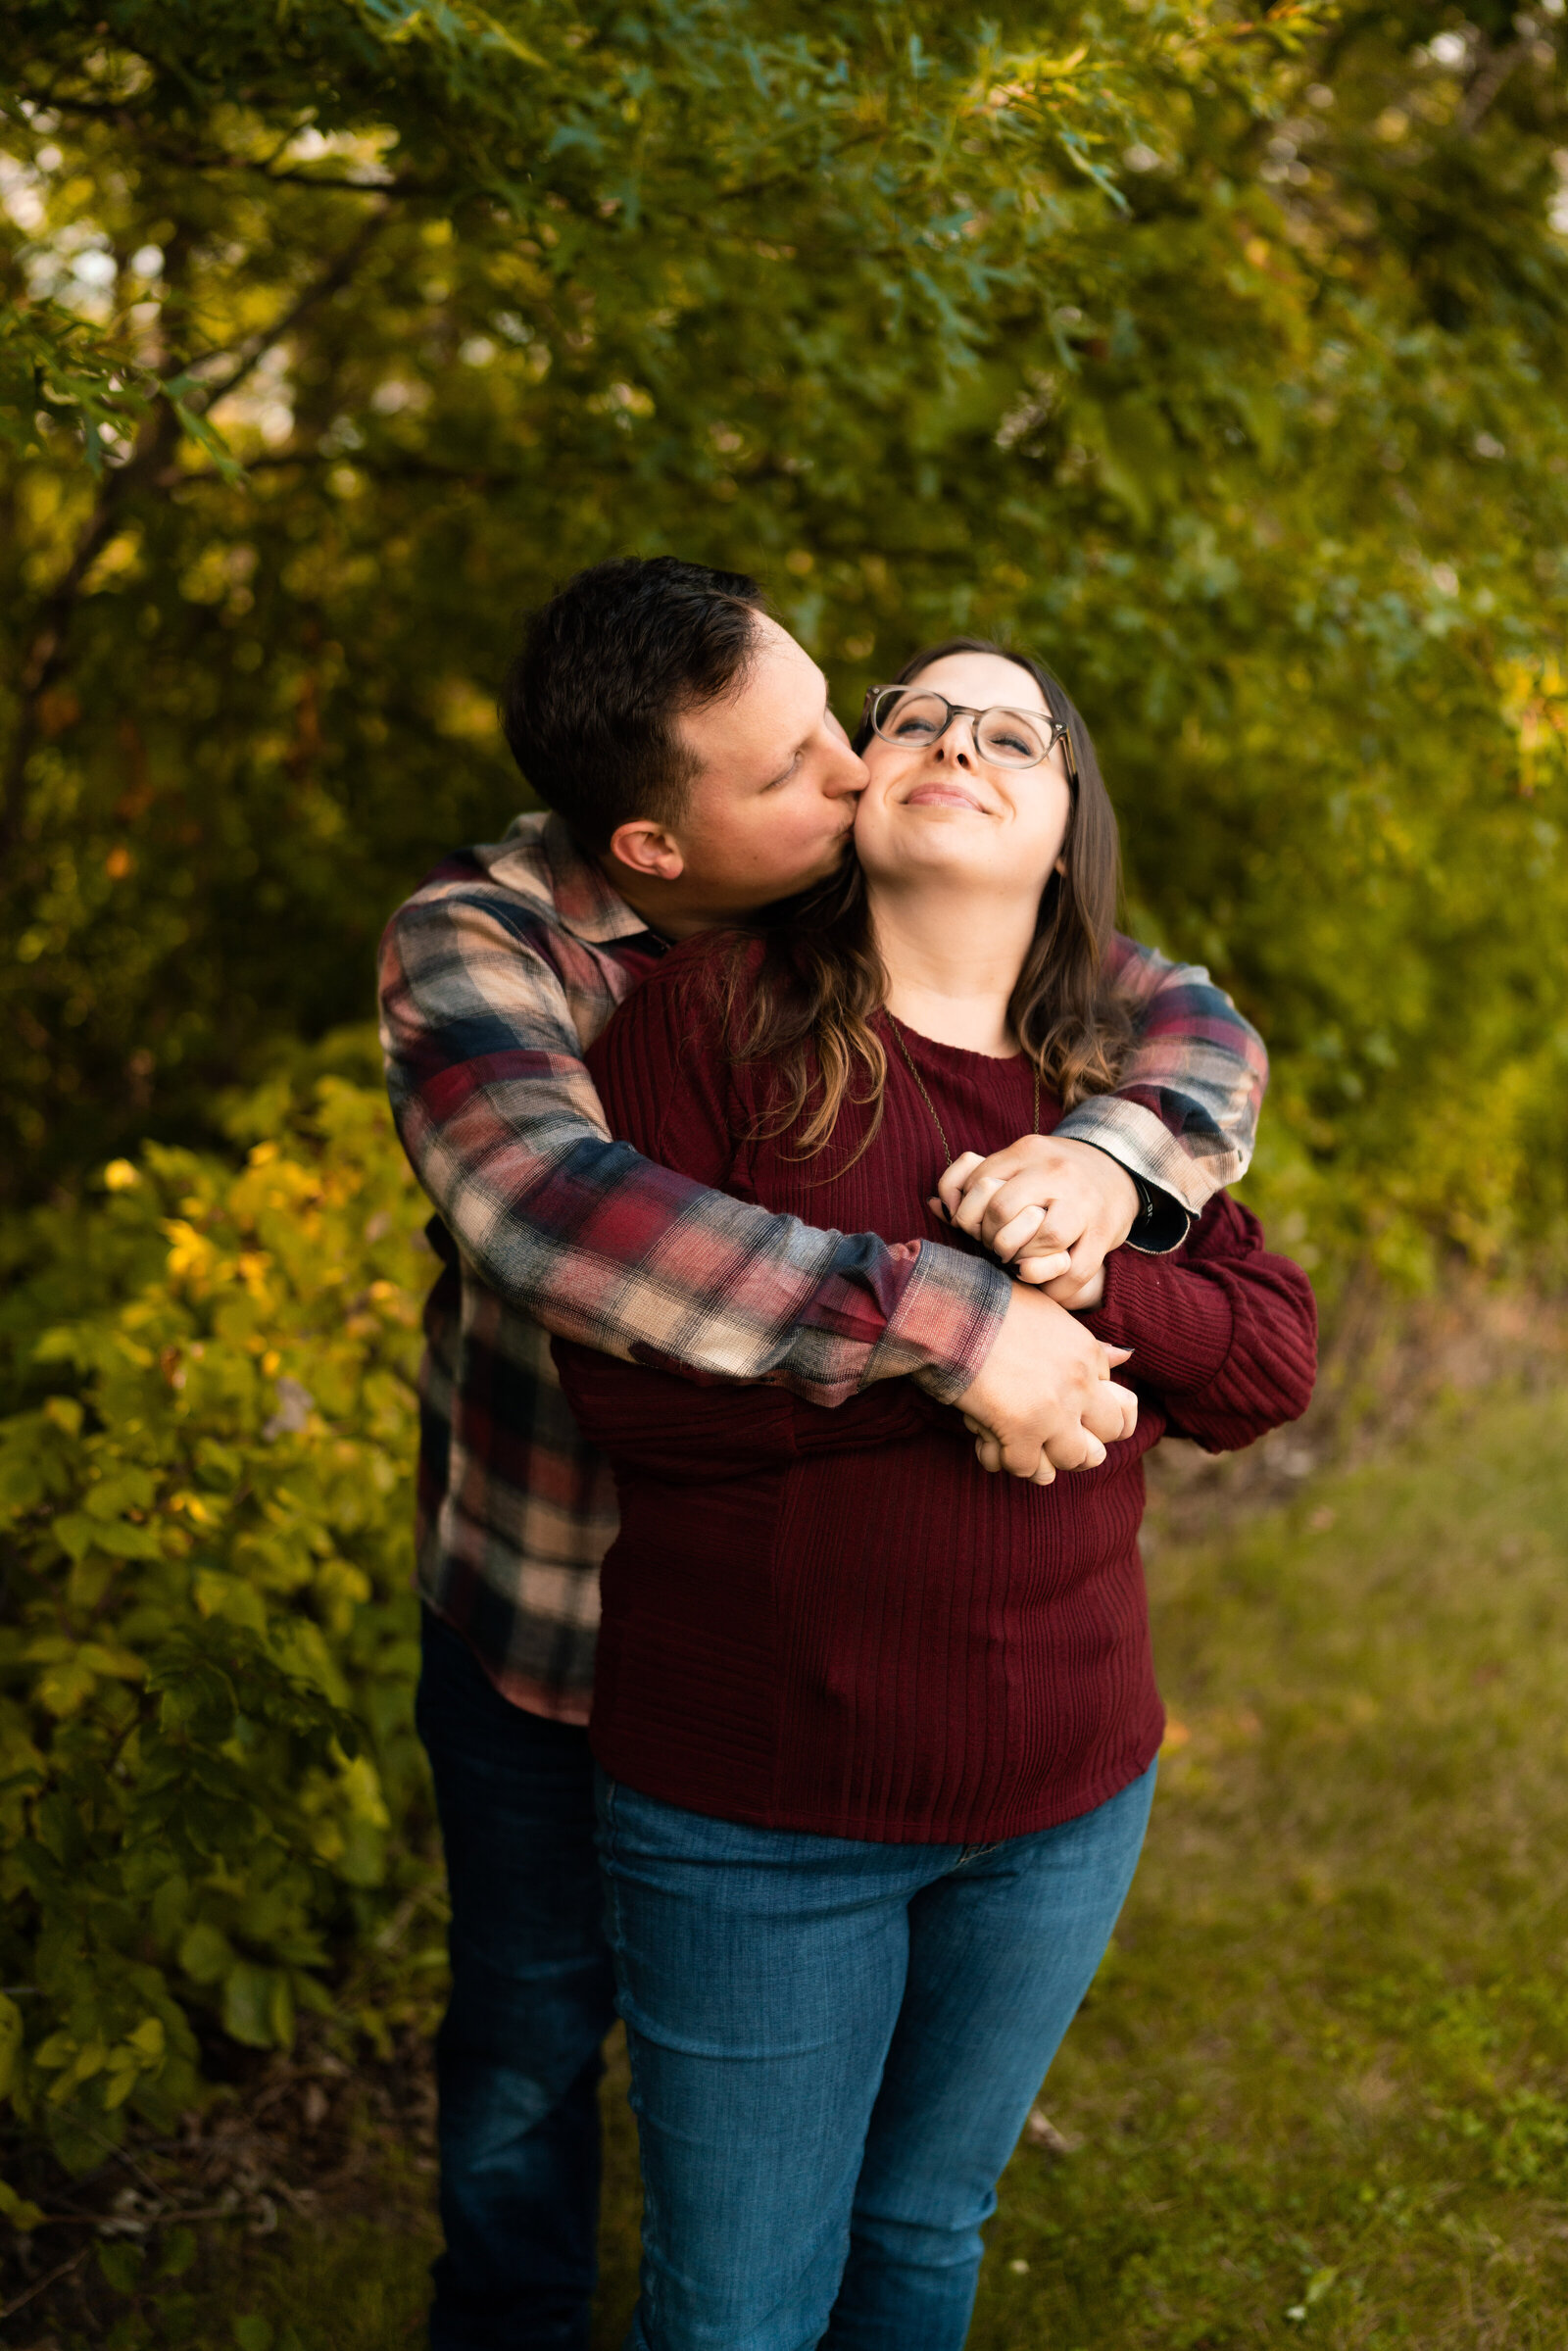 Man in flannel and woman in red sweater snuggle and kiss in park.